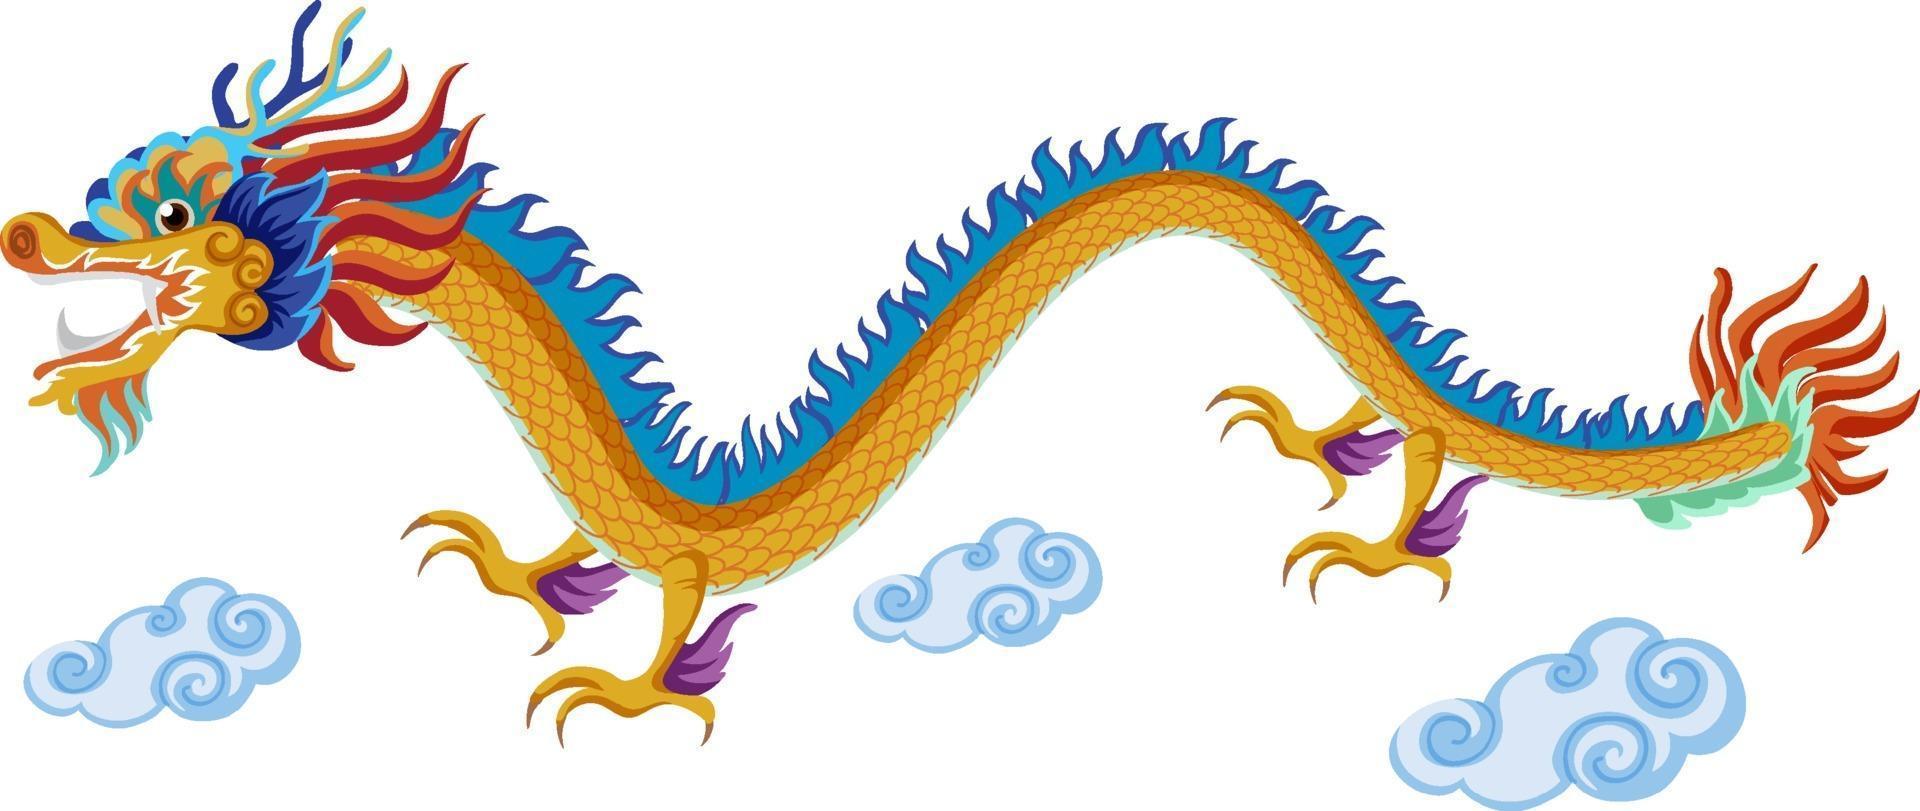 Chinese dragon flying over clouds isolated on white background vector